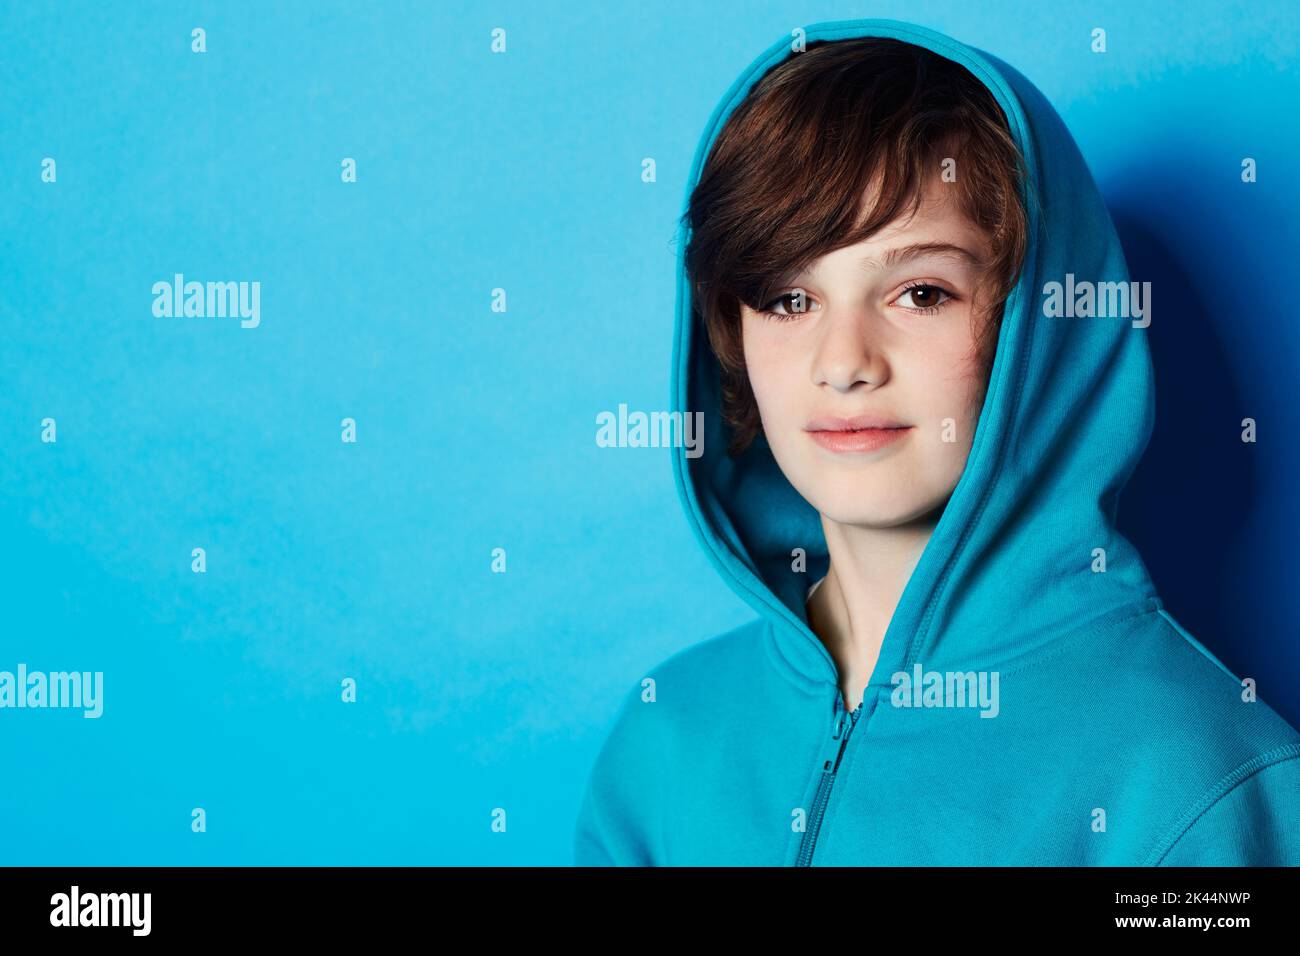 Confident and casual. Portrait of a young boy wearing a blue hoodie in the studio. Stock Photo